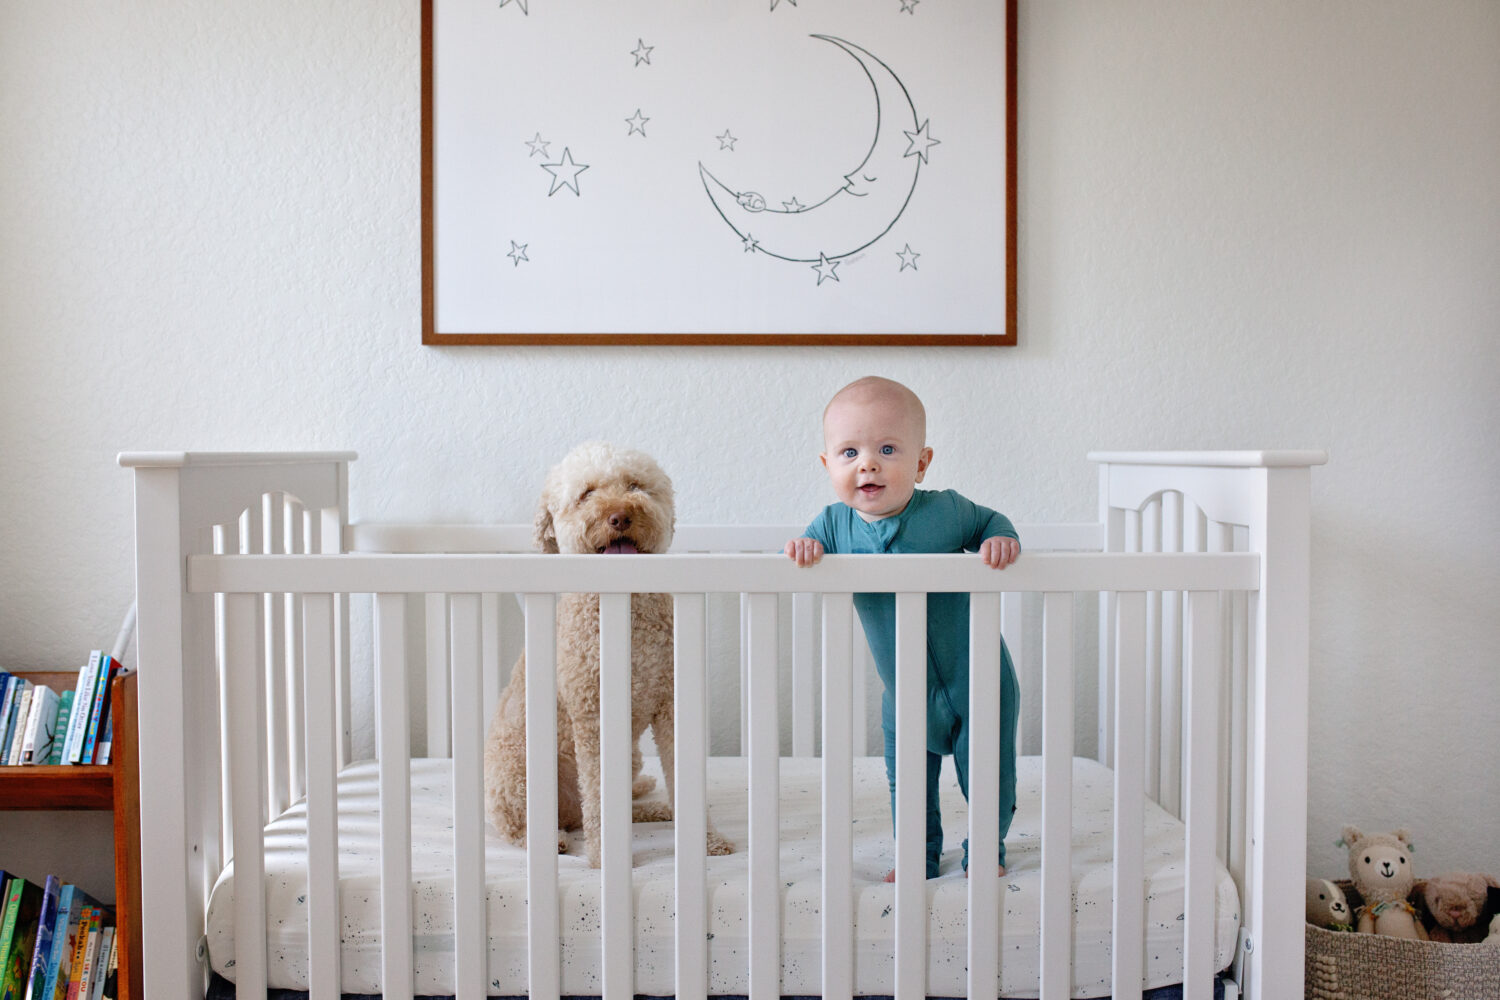 Baby boy and dog in crib laughing